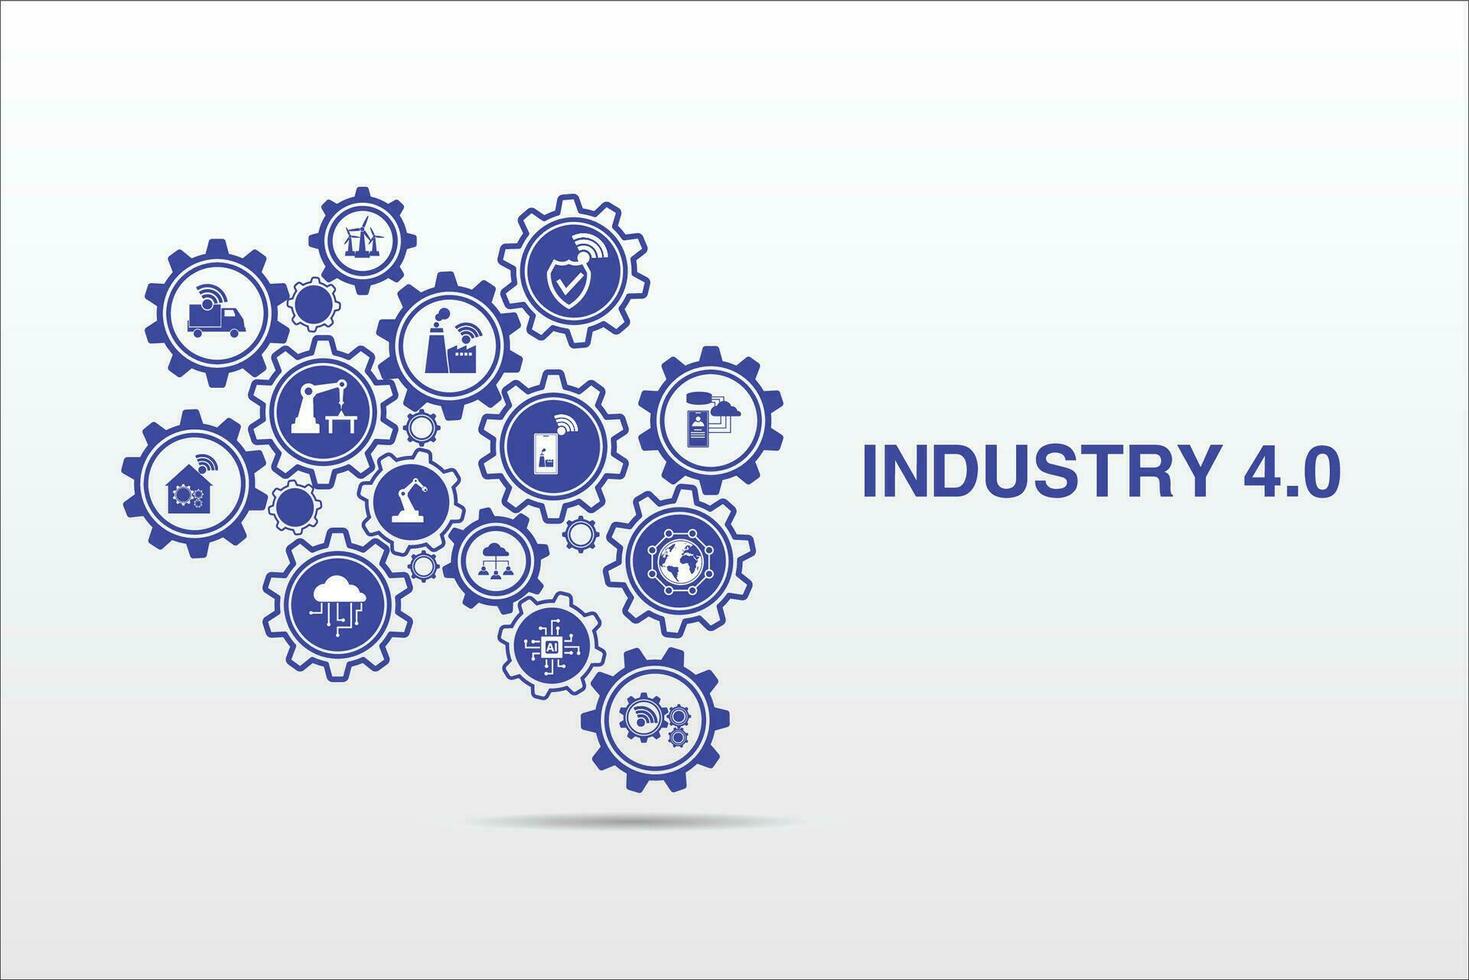 Industrial 4.0 process system on industrial factory and connection with automation, robot, data management. Industry 4.0 and smart productions icon set vector